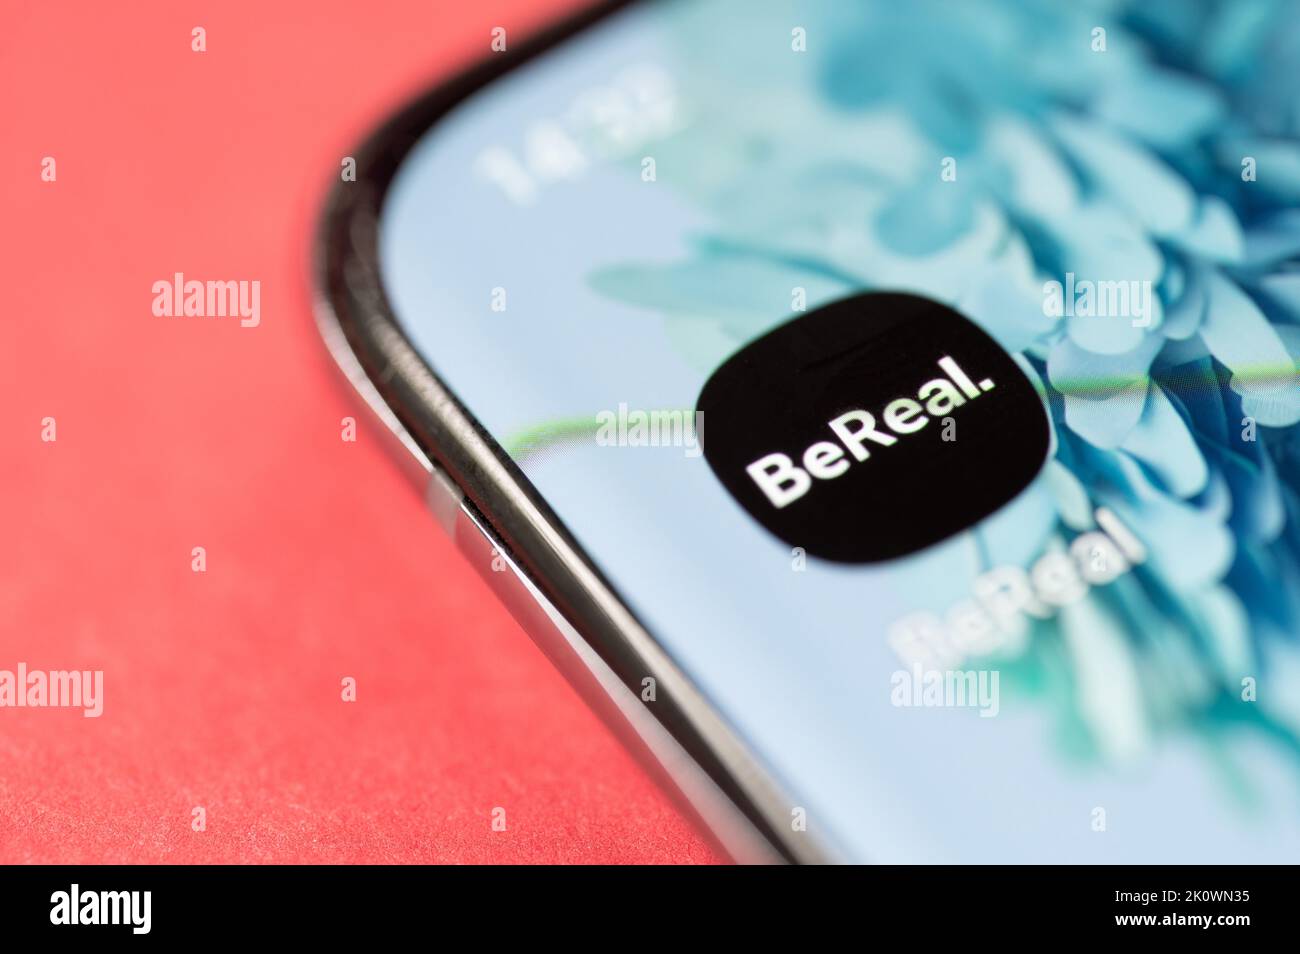 New york, USA - september 13, 2022:New BeReal social app on smartphone screen macro close up view background Stock Photo